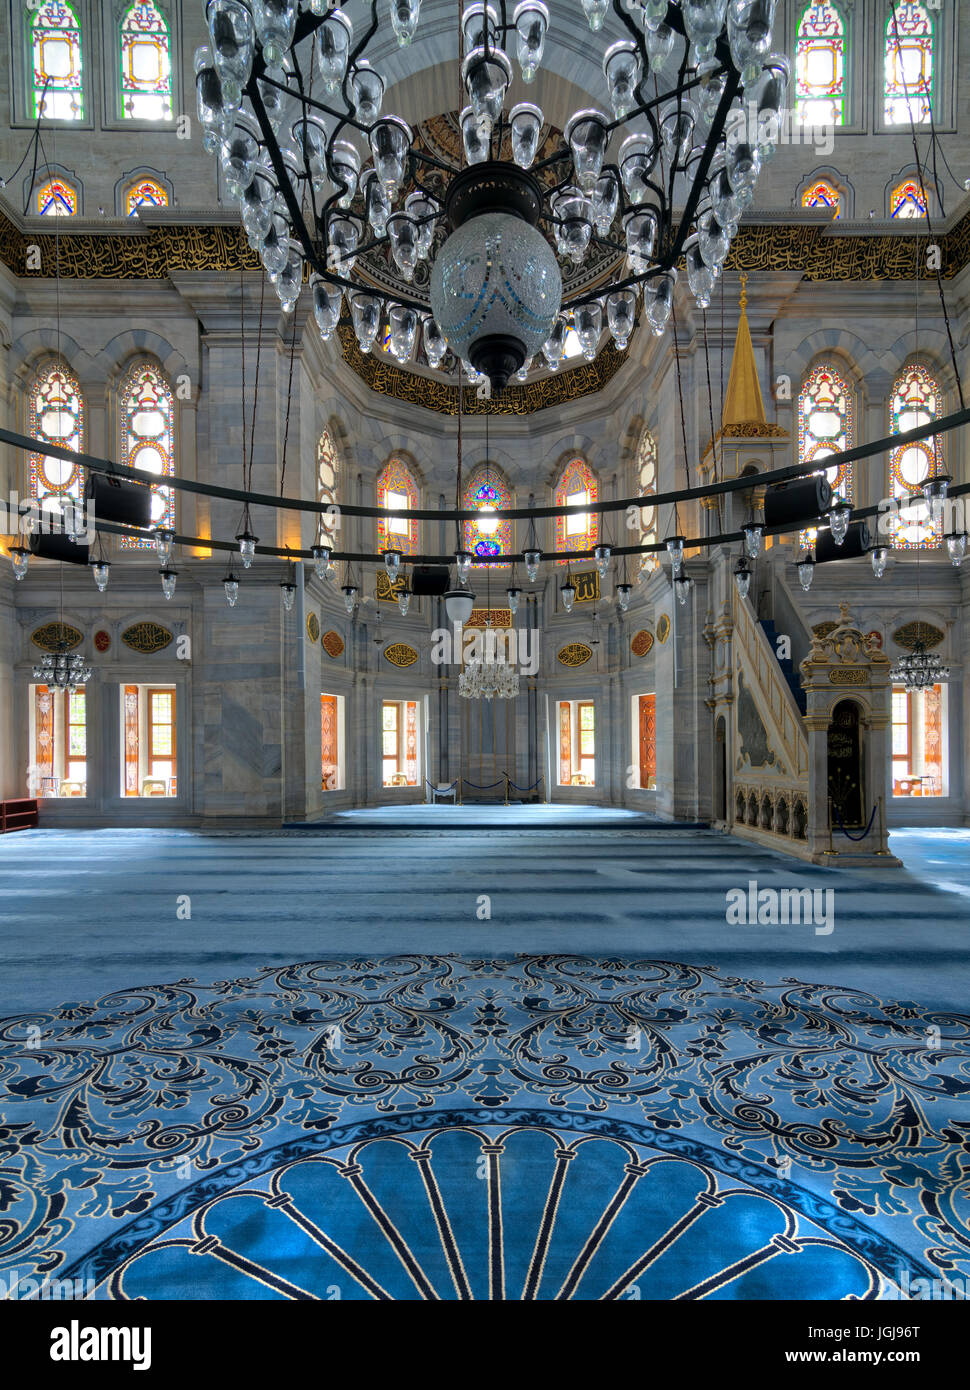 Interior shot of Nuruosmaniye Mosque, an Ottoman Baroque mosque, overlooking niche (Mihrab) and marble minbar (Platform) facade with many colored stai Stock Photo